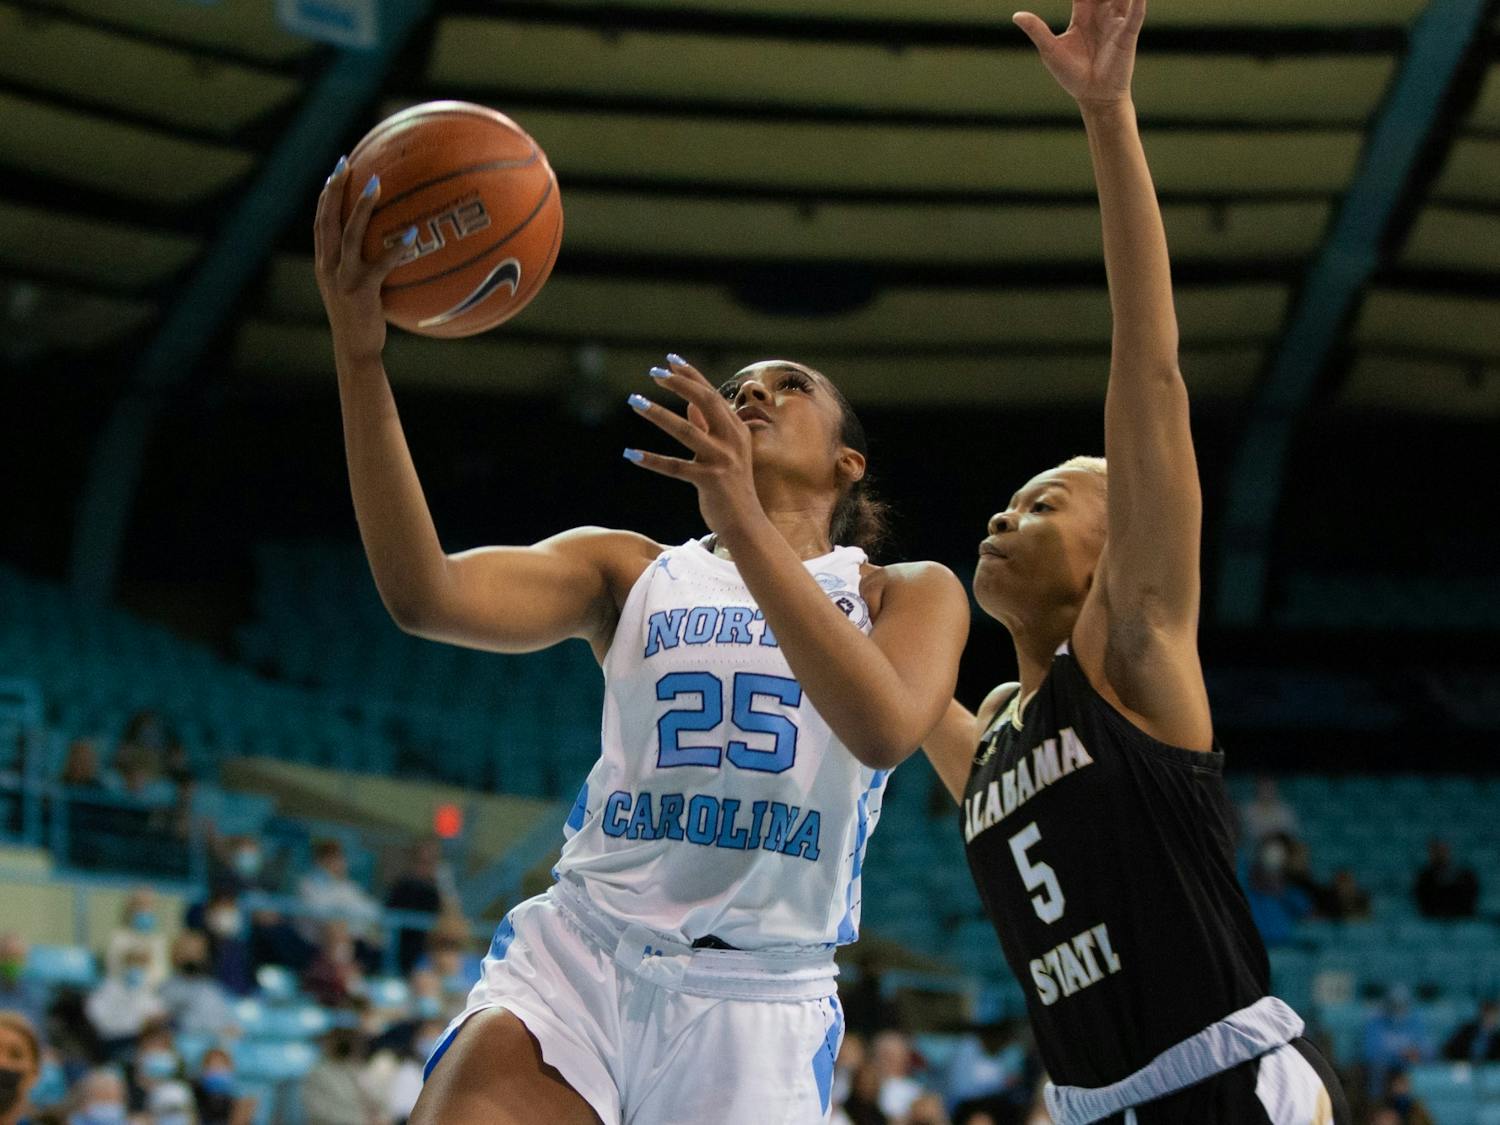 Sophomore guard Deja Kelly (25) shoots a layup at the game against Alabama State on December 21, 2021 at Carmichael Arena.